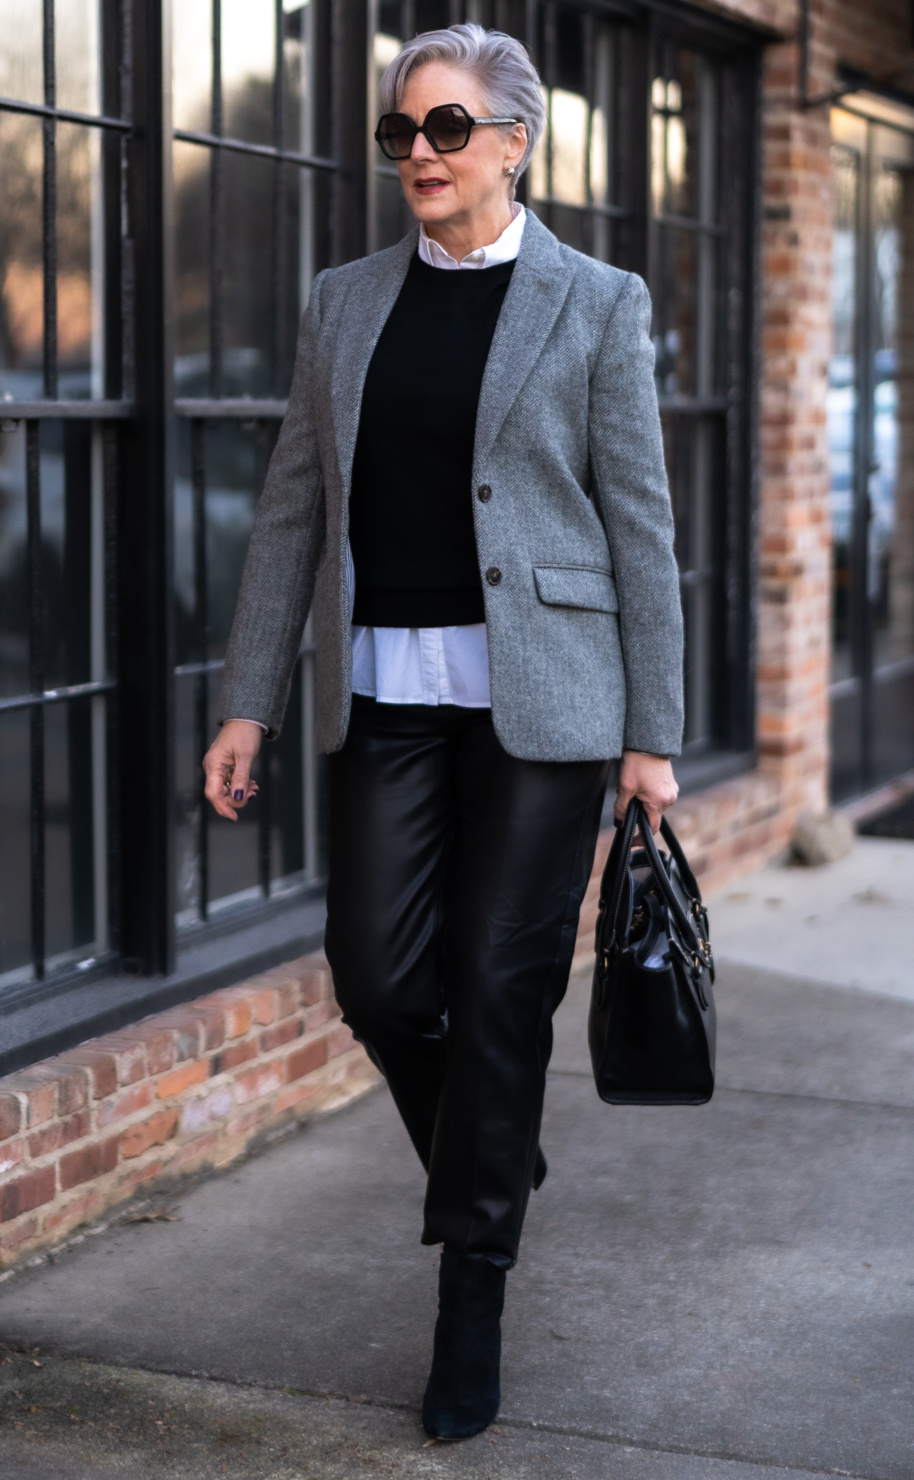 Are you too old to wear leather pants? Should you dress your age?